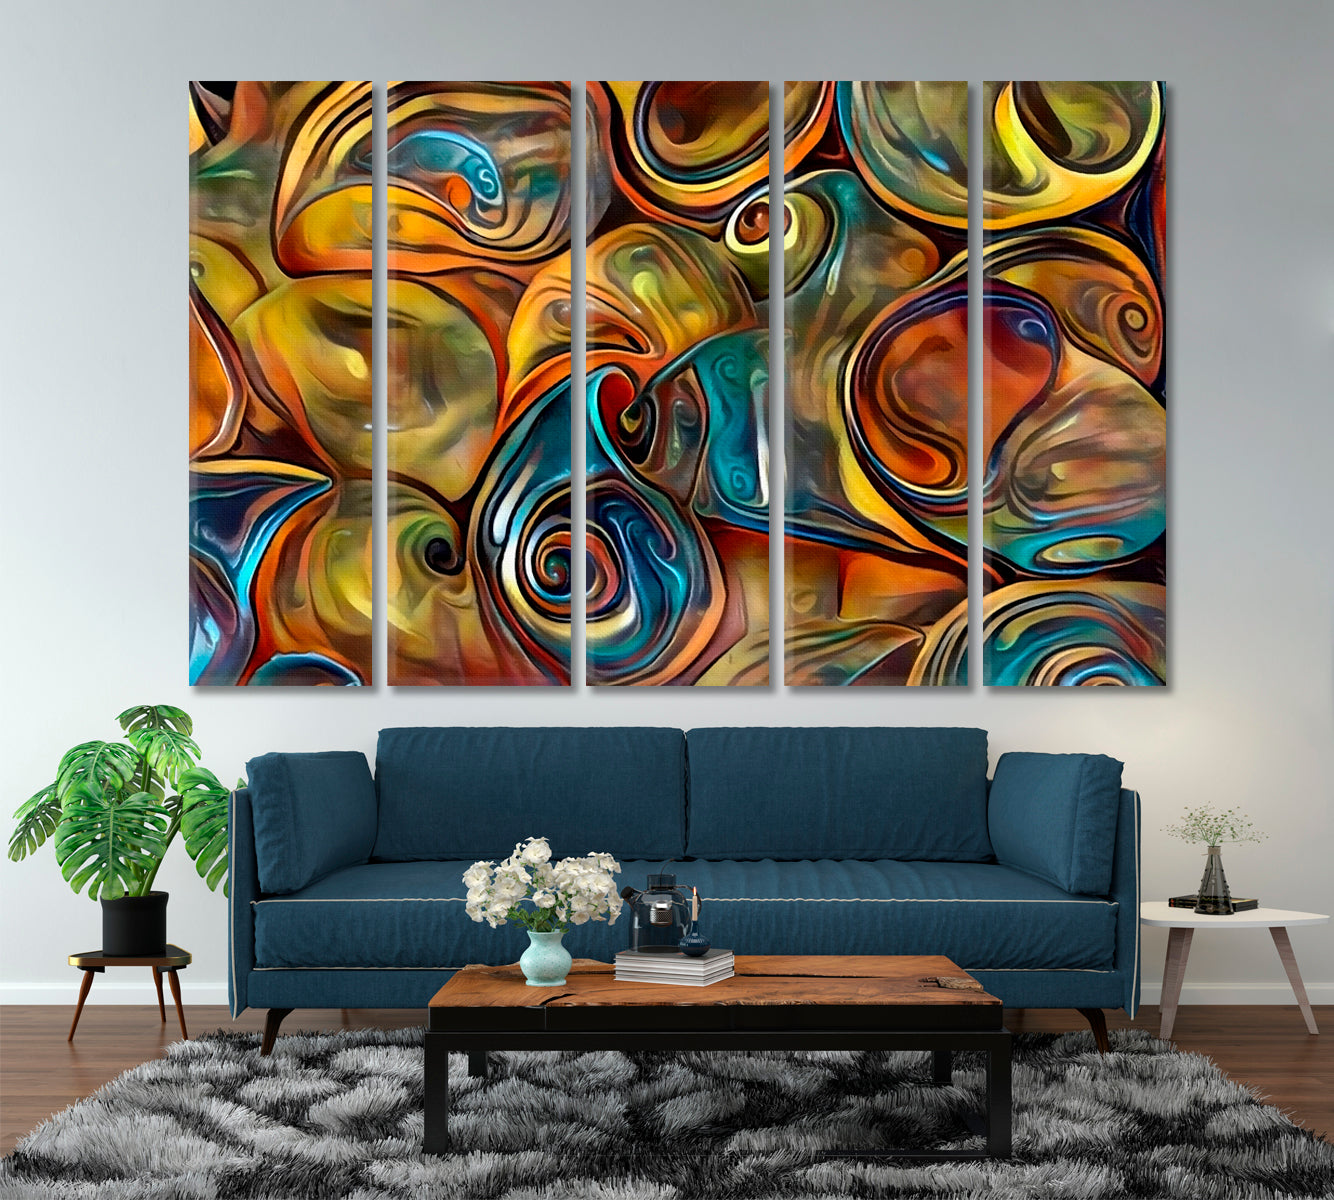 ABSTRACT SEASHELLS  Fluid Lines and Color Movement Abstract Art Print Artesty 5 panels 36" x 24" 